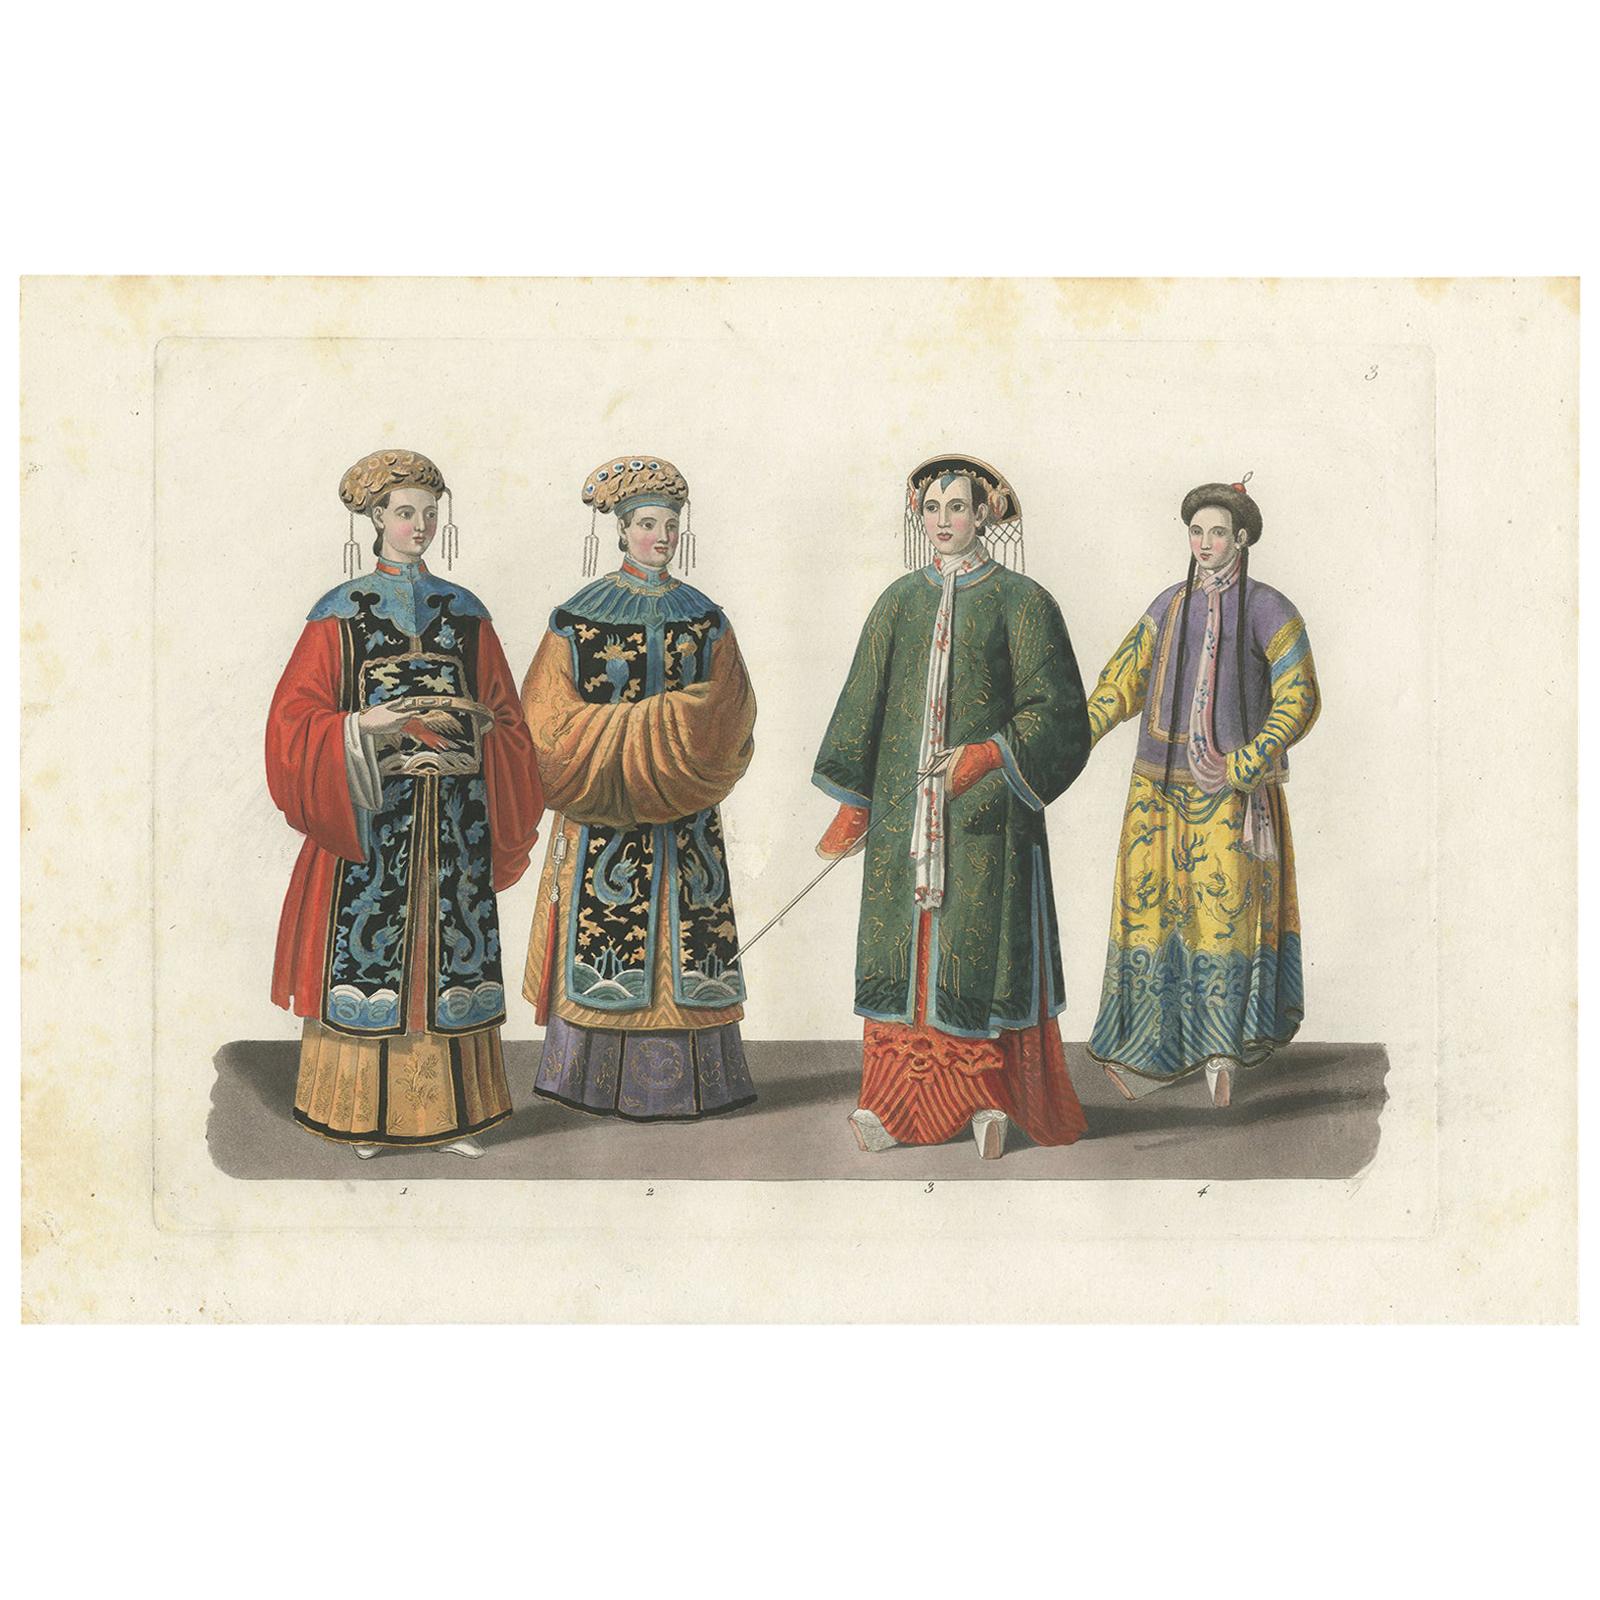 Antique Print of Costumes of Chinese Women by Ferrario '1831'